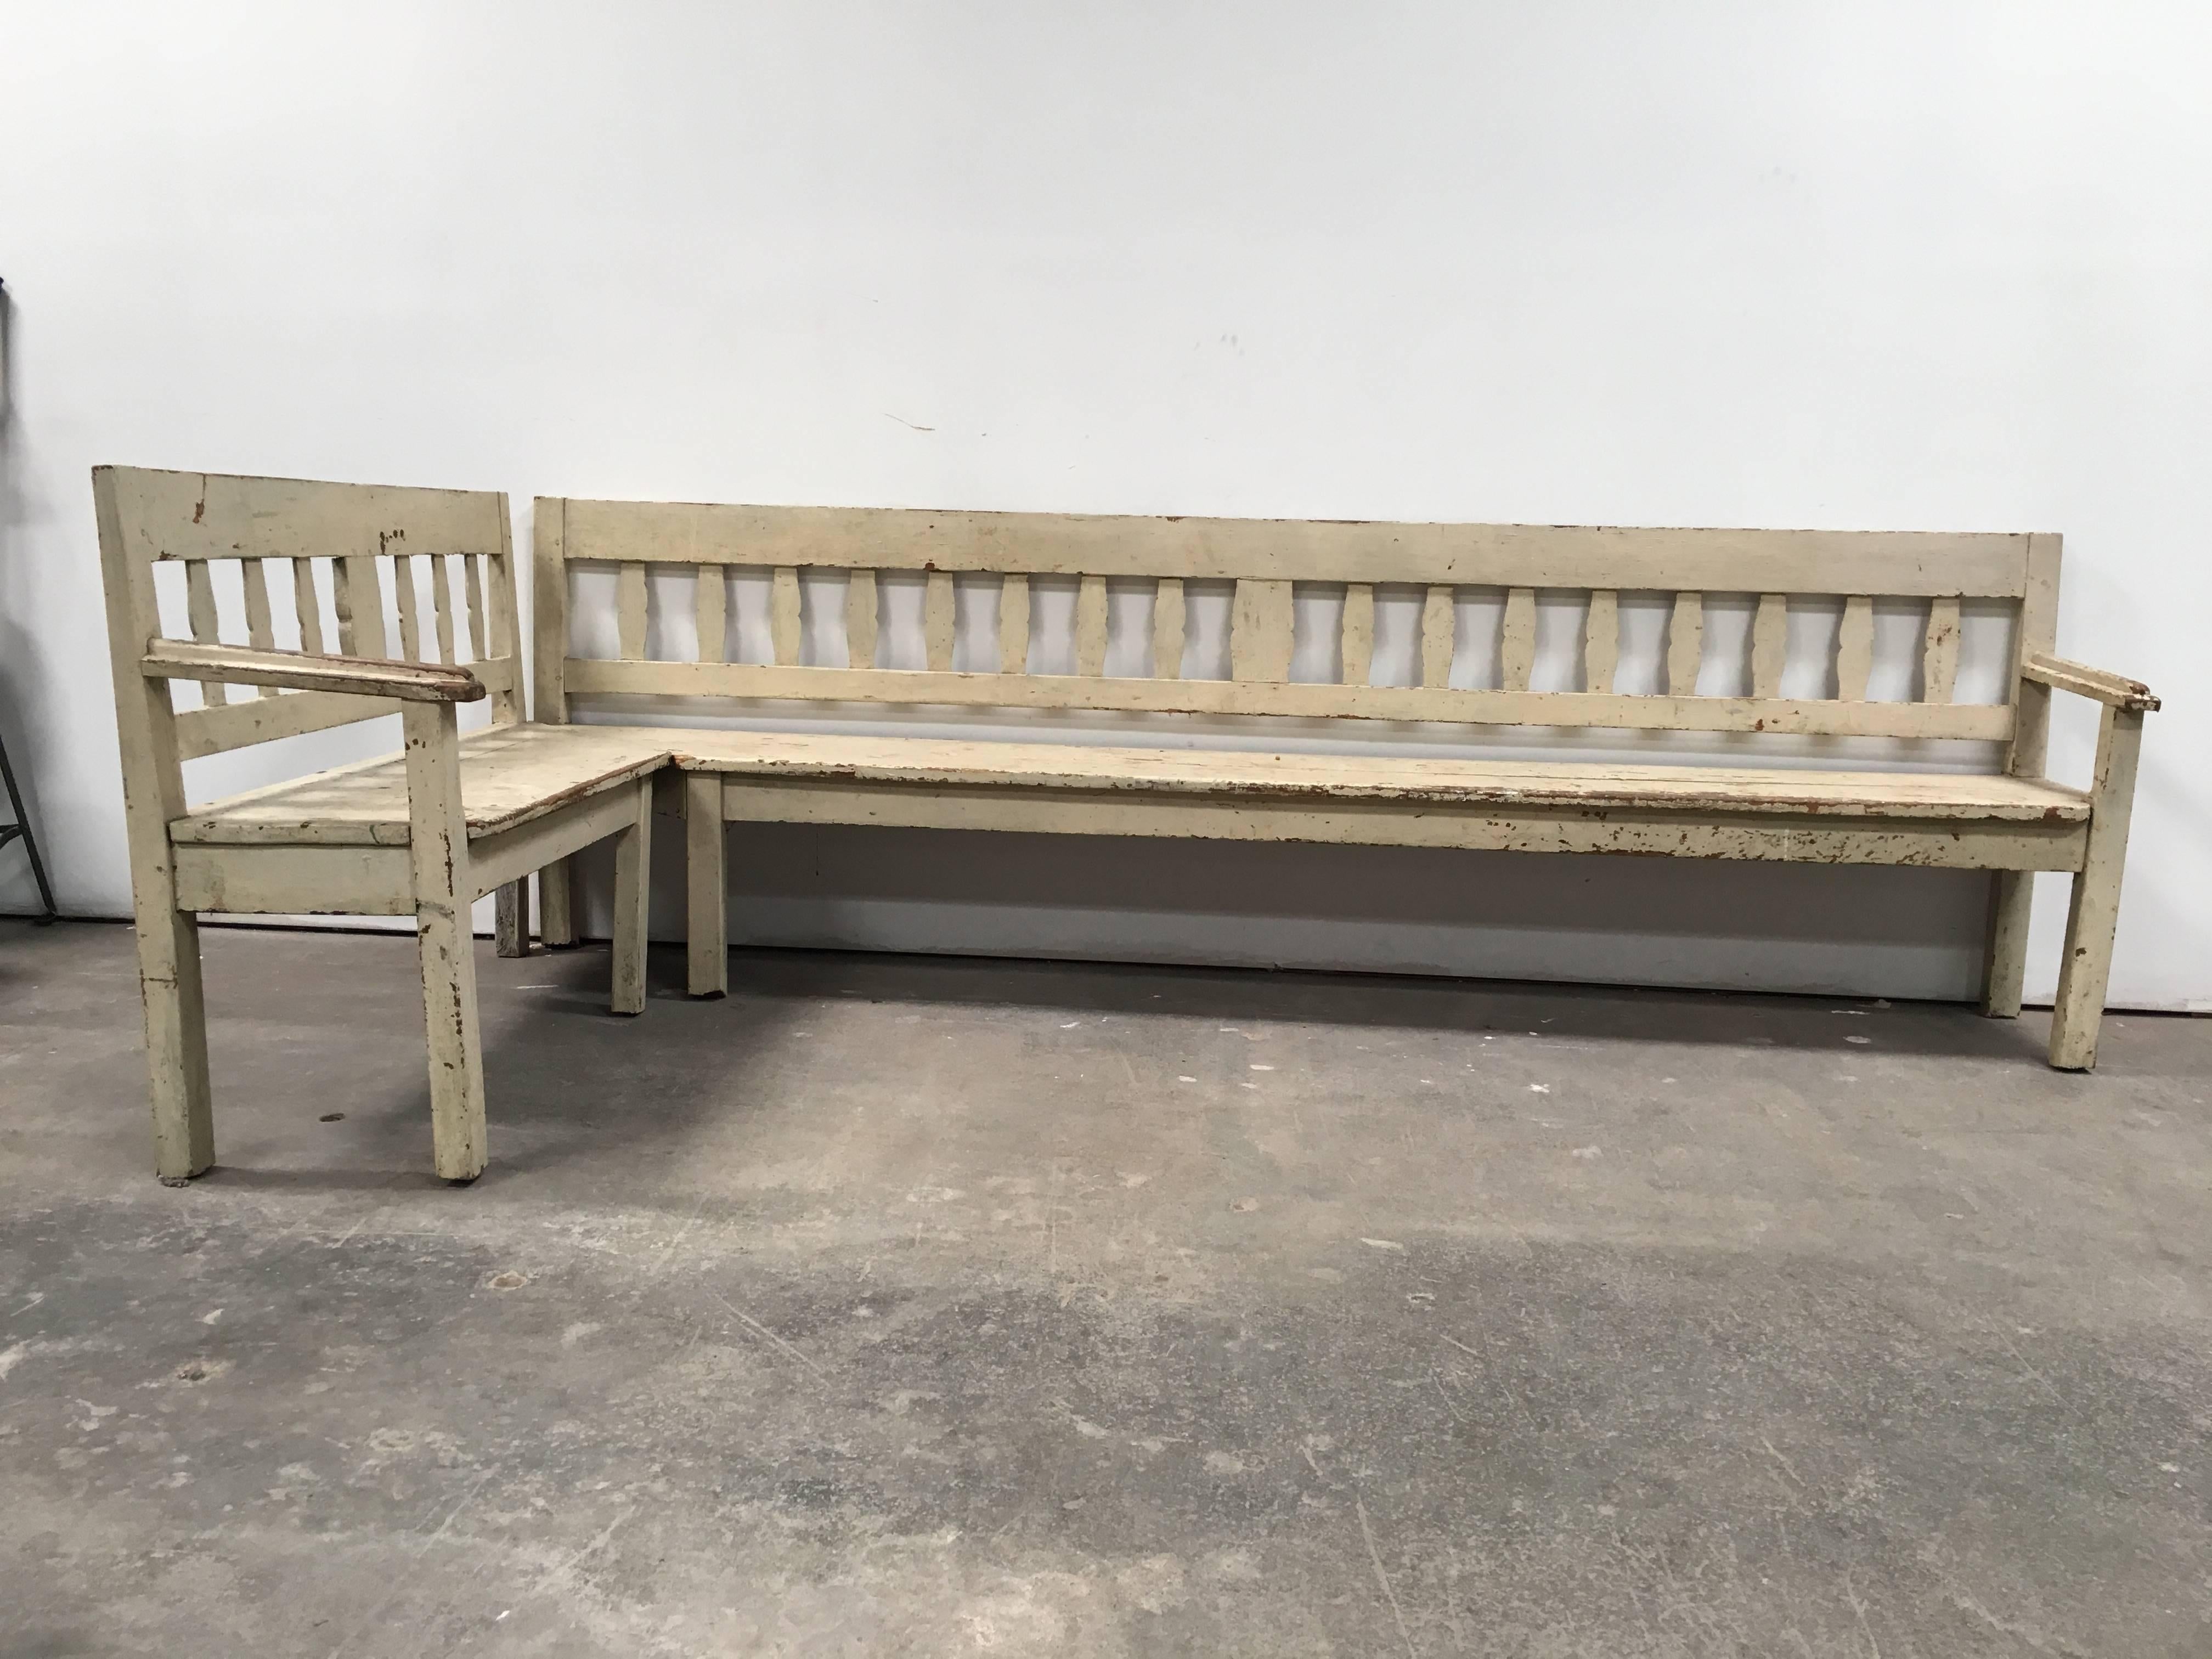 One of a kind sectional indoor/outdoor bench. Would be beautiful in a garden!

Long piece is 108